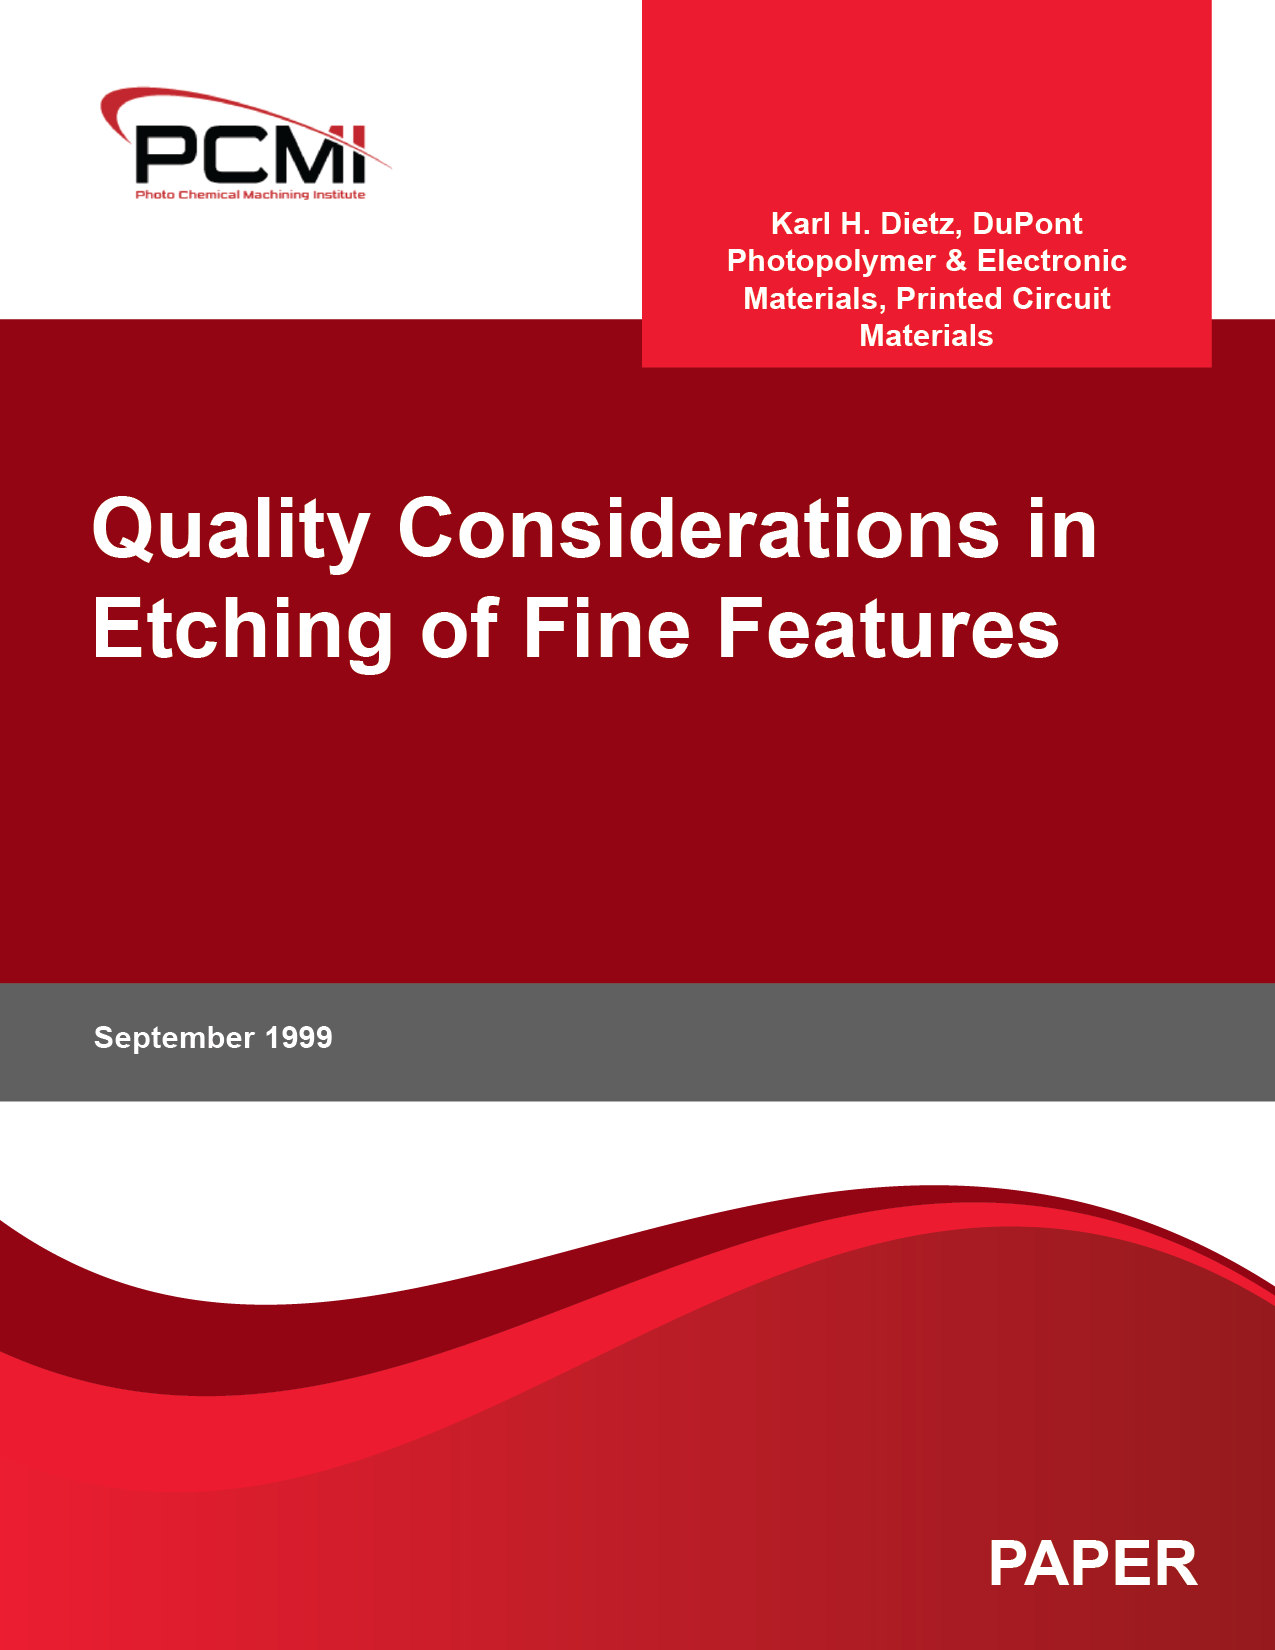 Quality Considerations in Etching of Fine Features